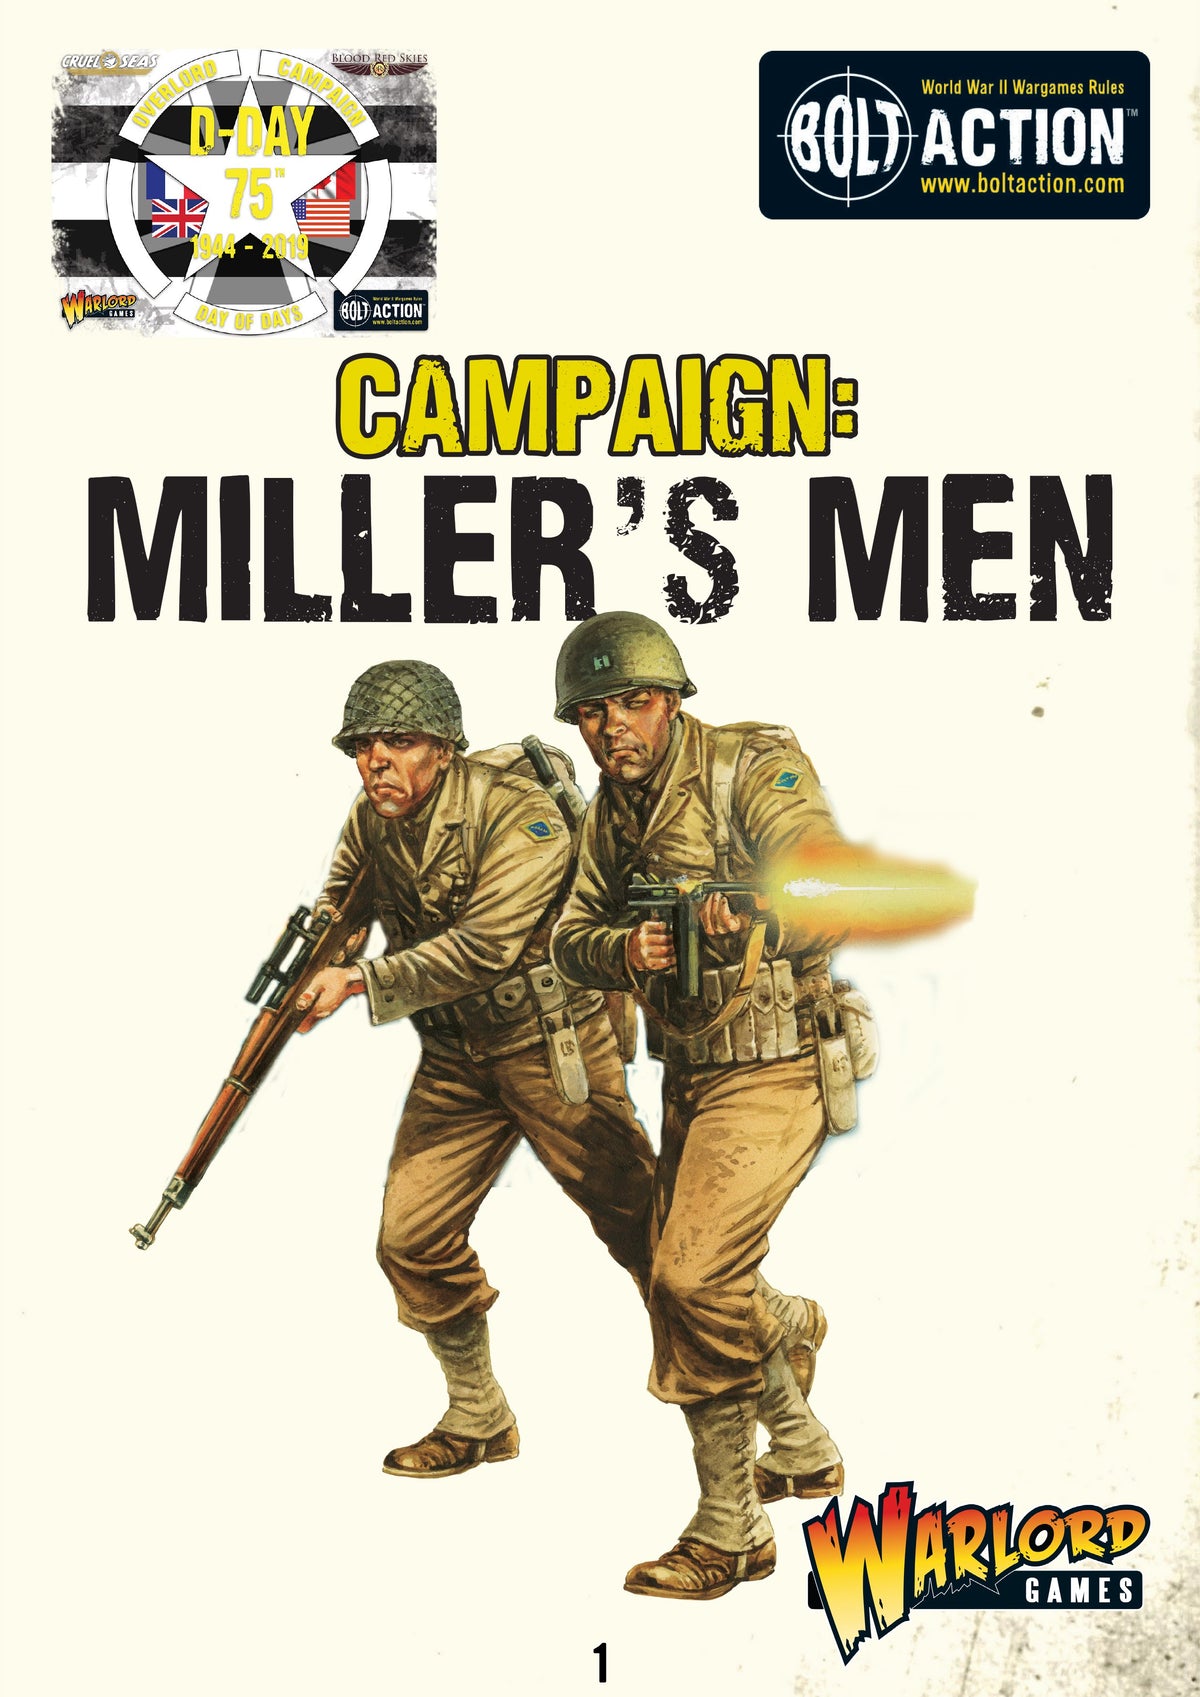 75th D-Day anniversary Campaign Pack - Millers Men PDF